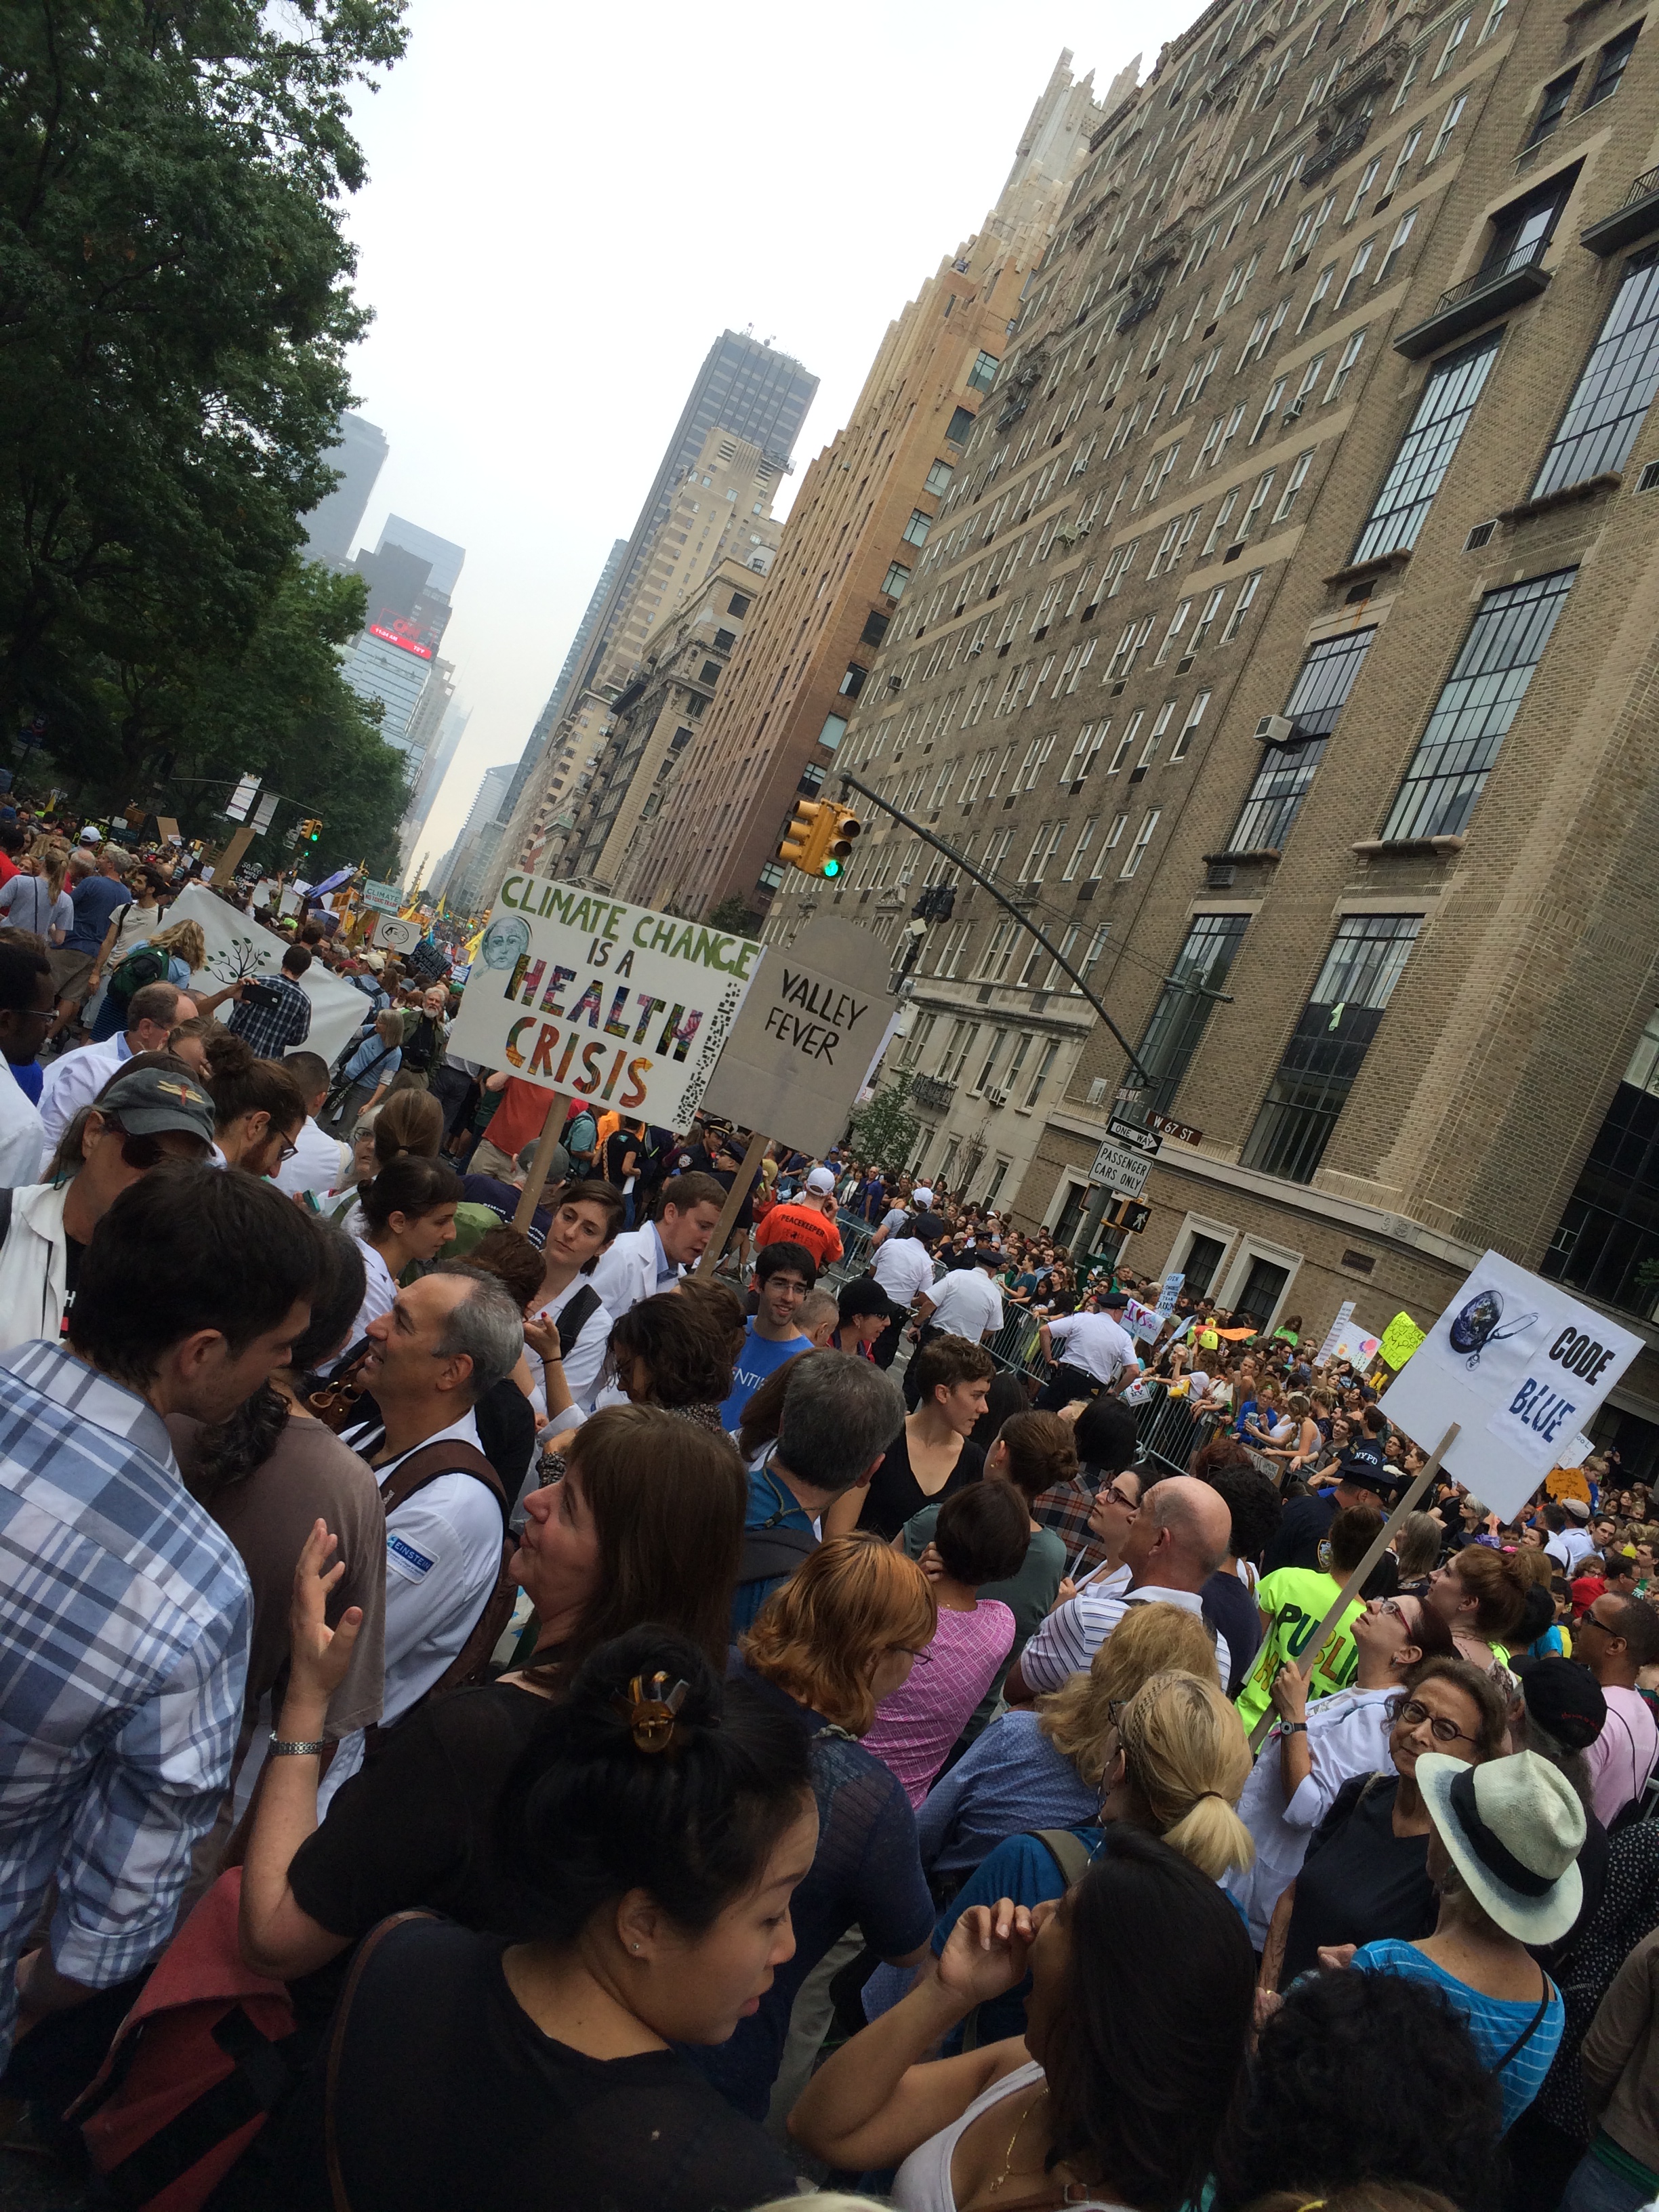 New York street fill with people holding signs including "Climate Change is a Health Crisis"